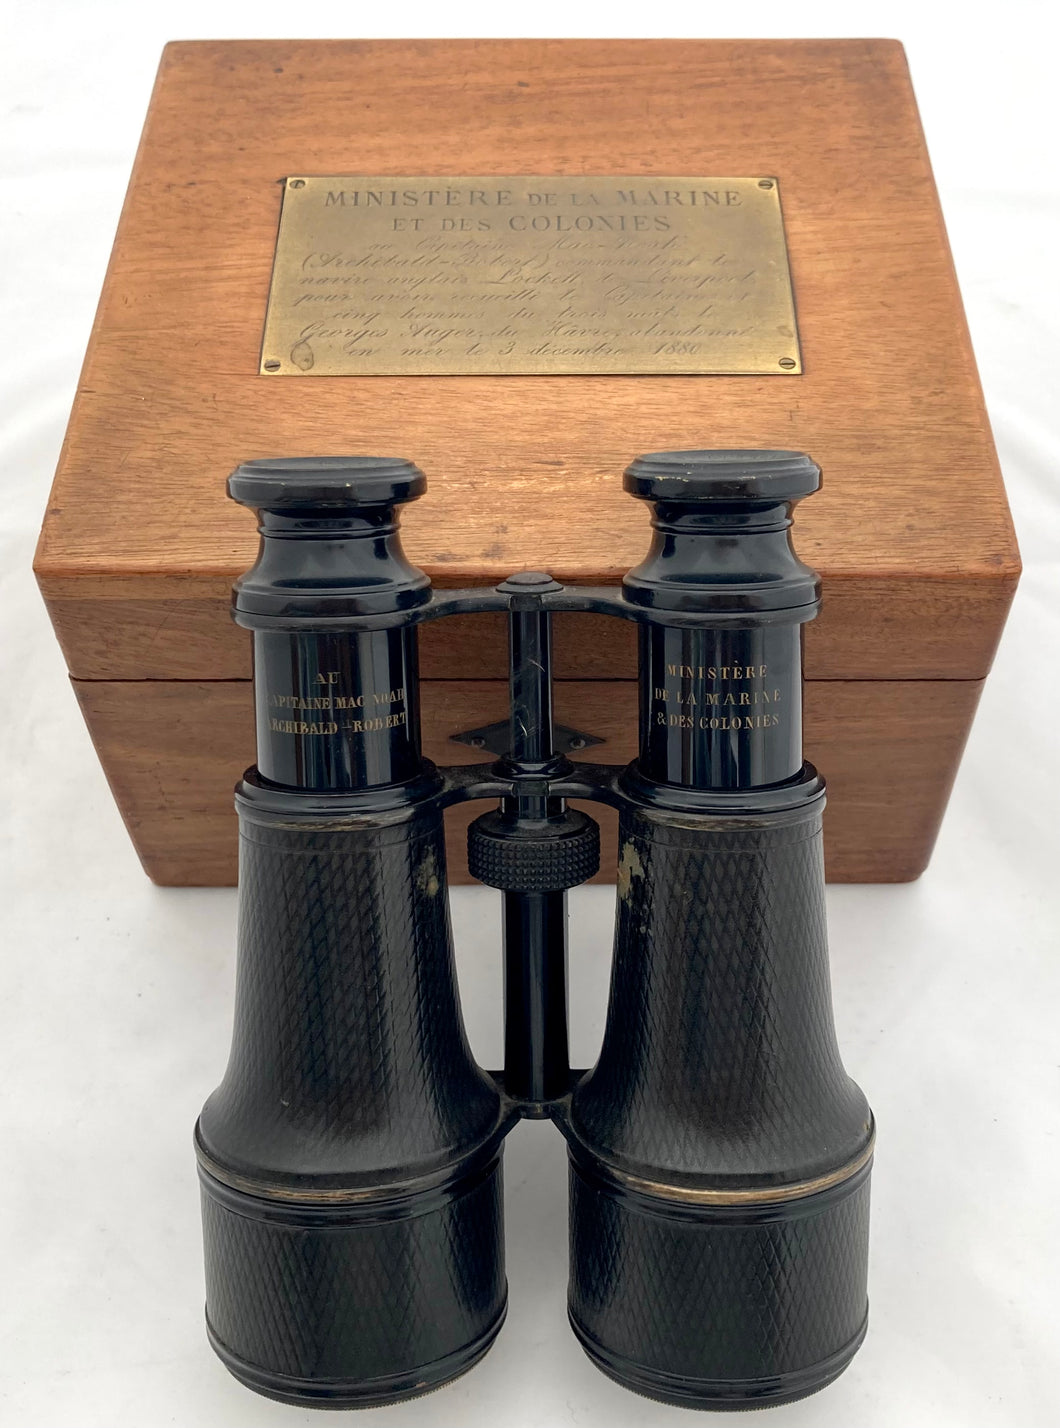 Cased Pair of Binoculars Presented by the French Naval & Colonies Minister to Capain MacNoah of the 